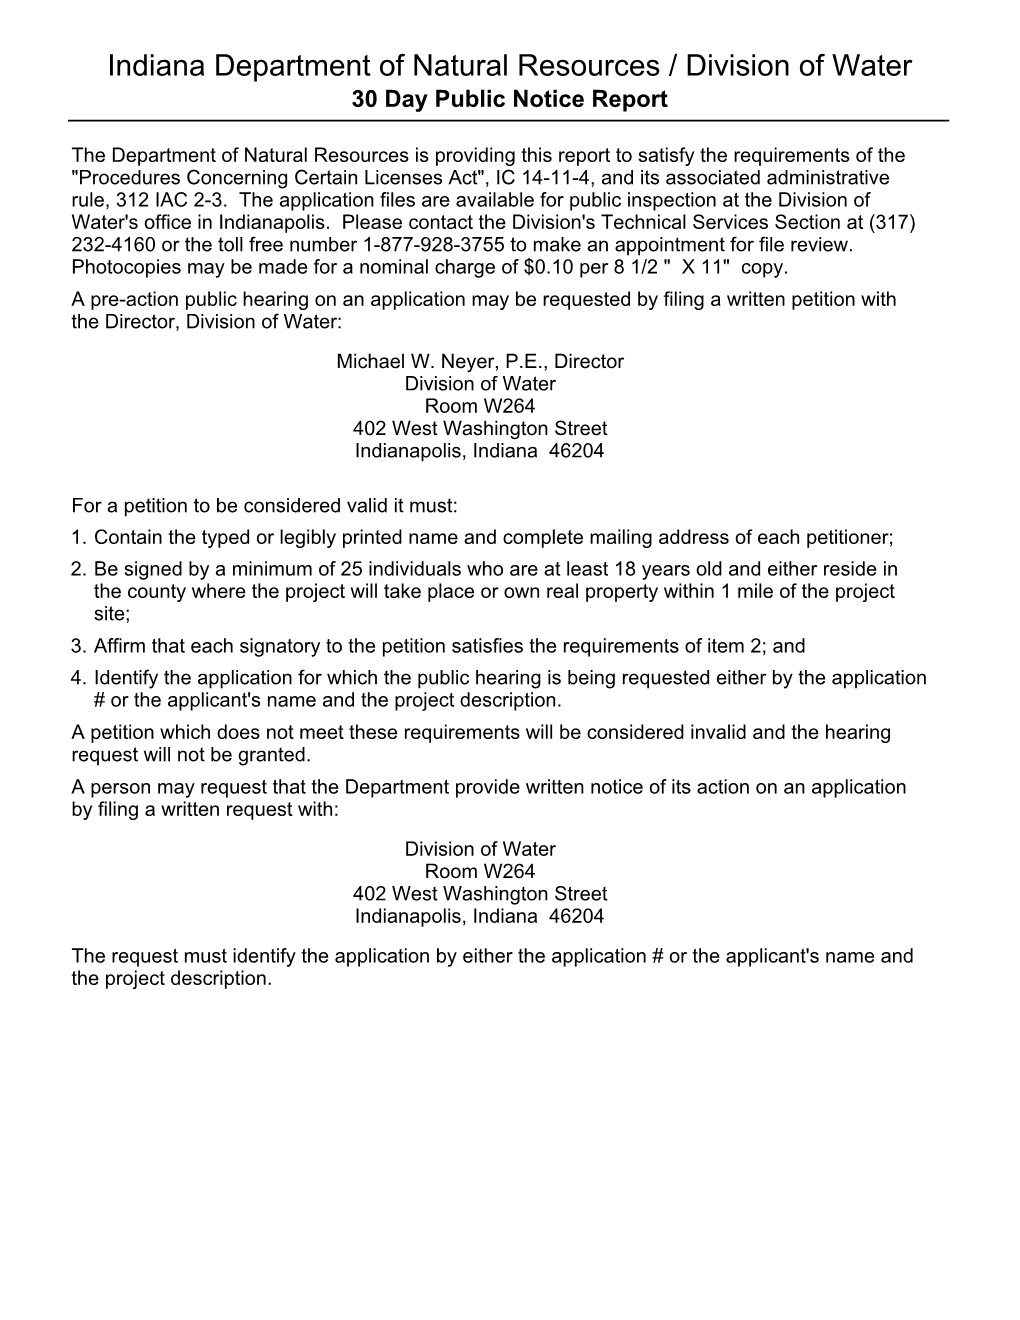 Indiana Department of Natural Resources / Division of Water 30 Day Public Notice Report